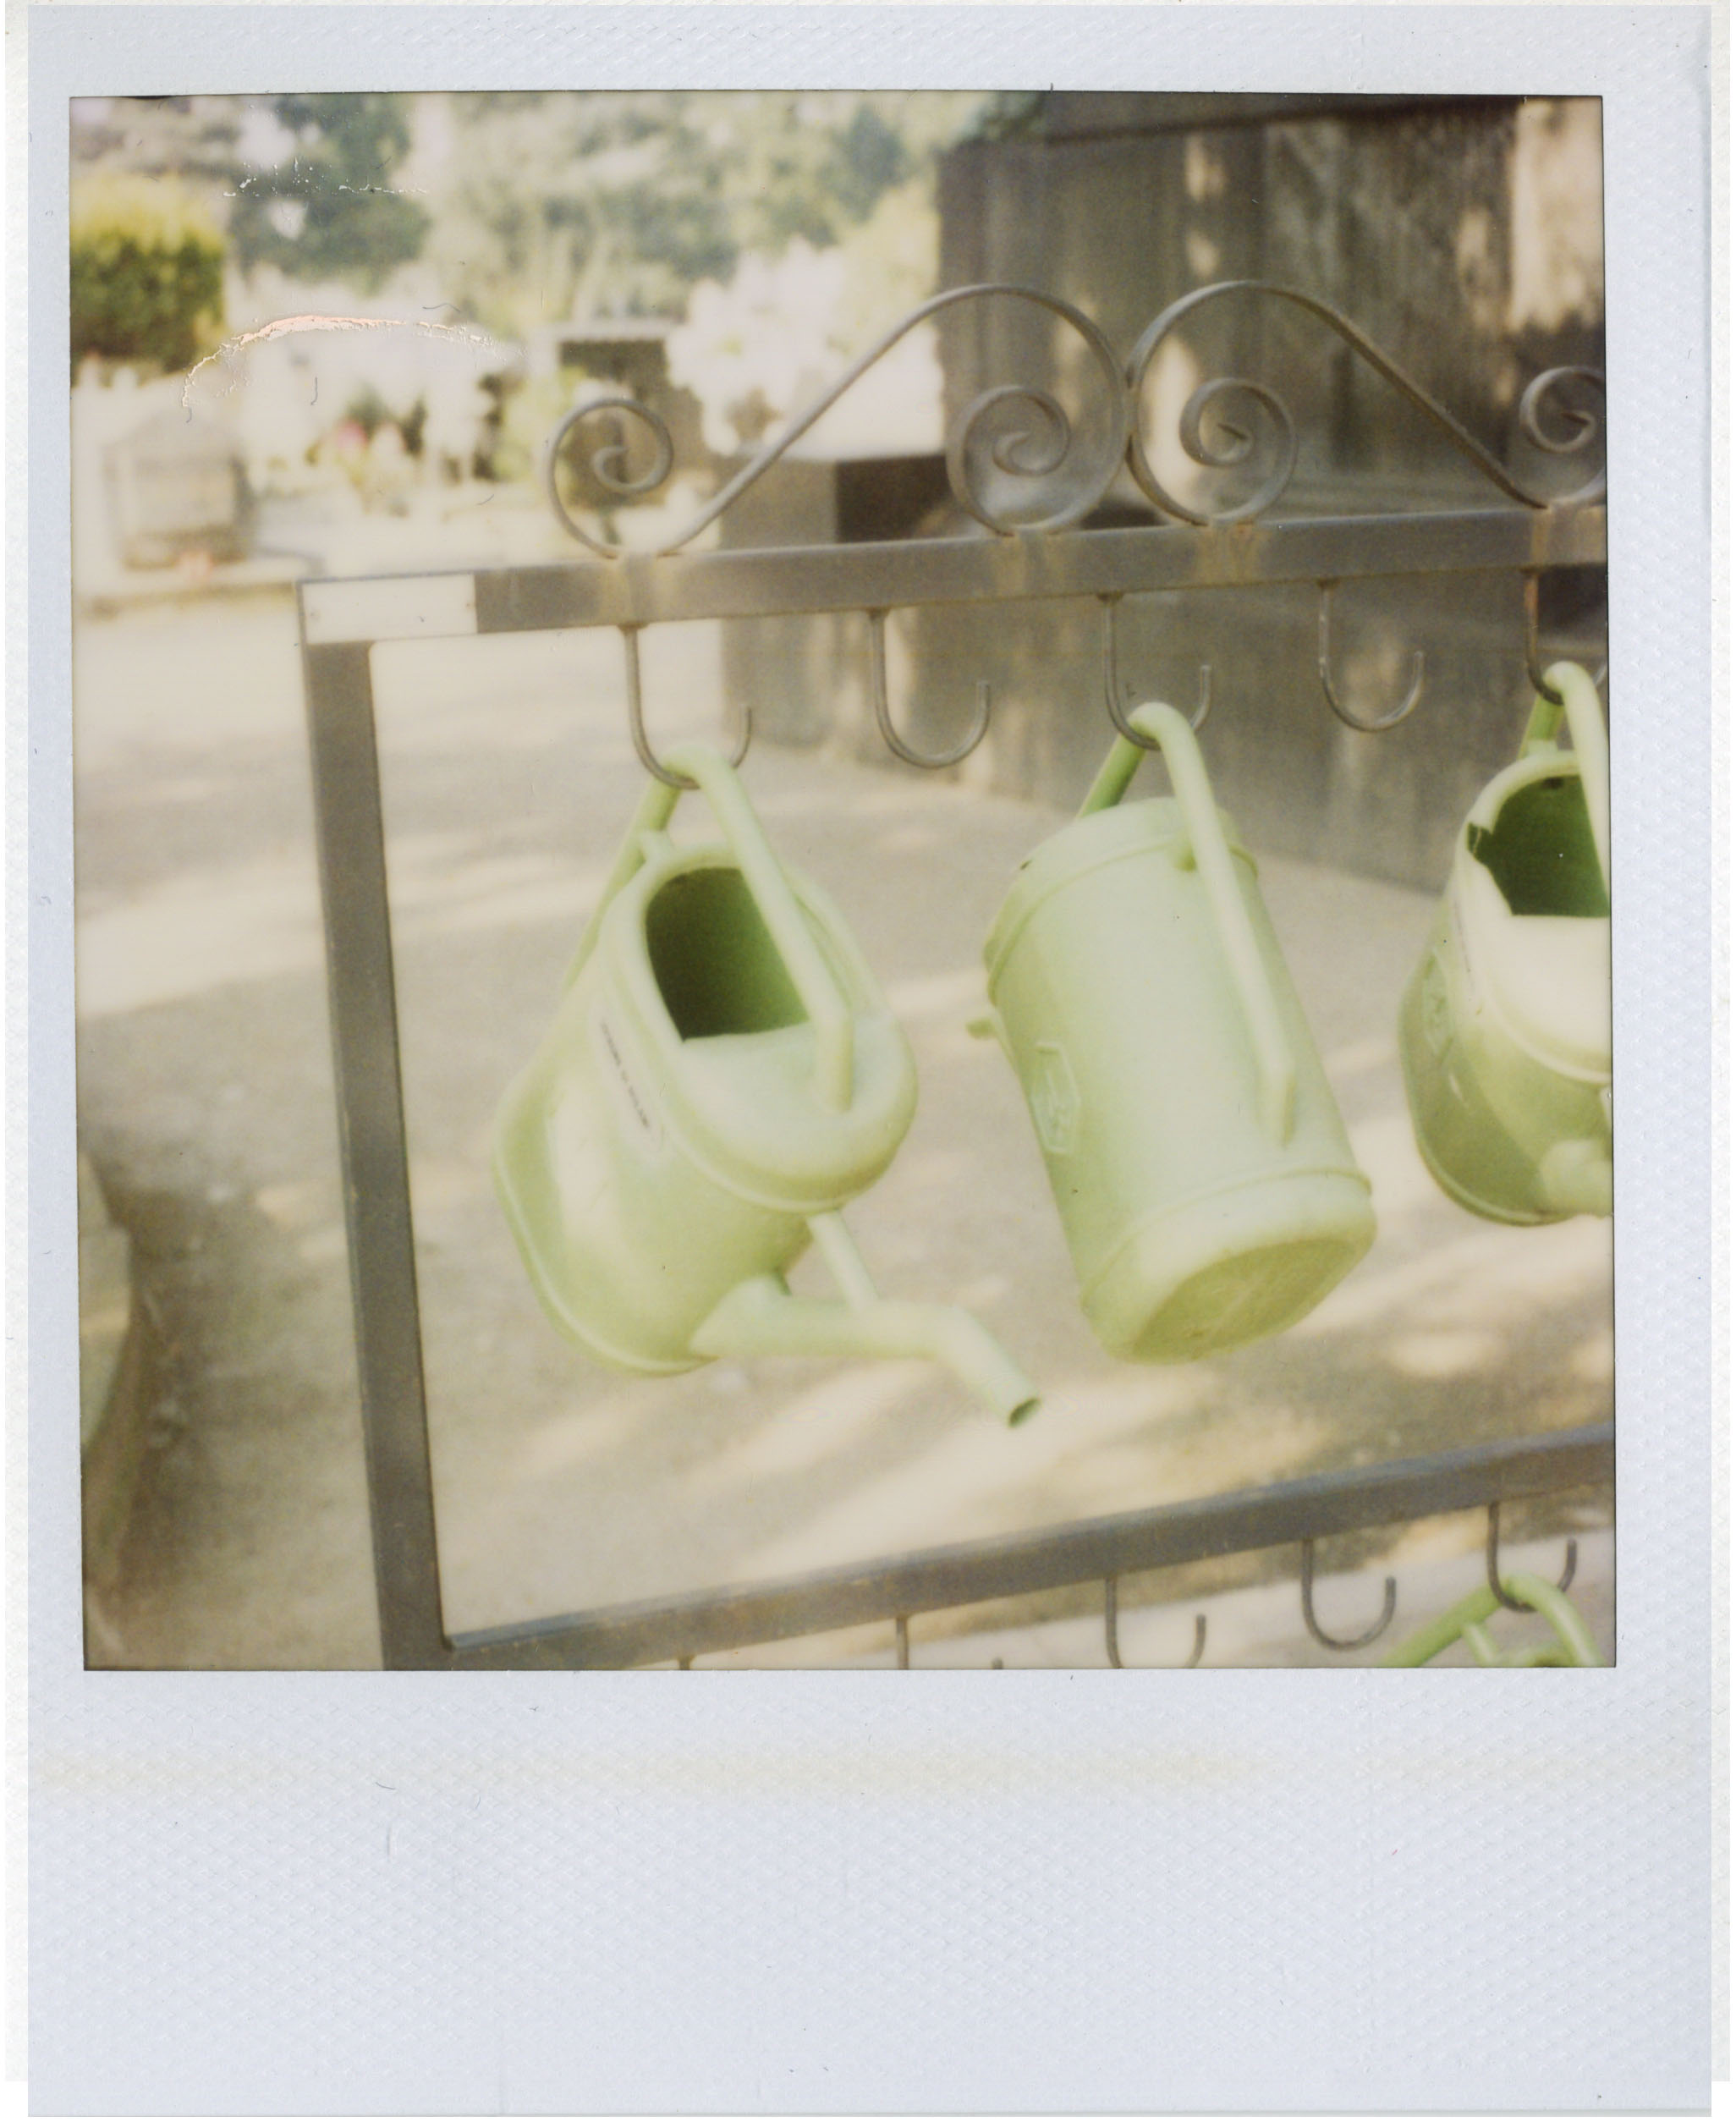 polaroid watering cans in cemetary in Milan